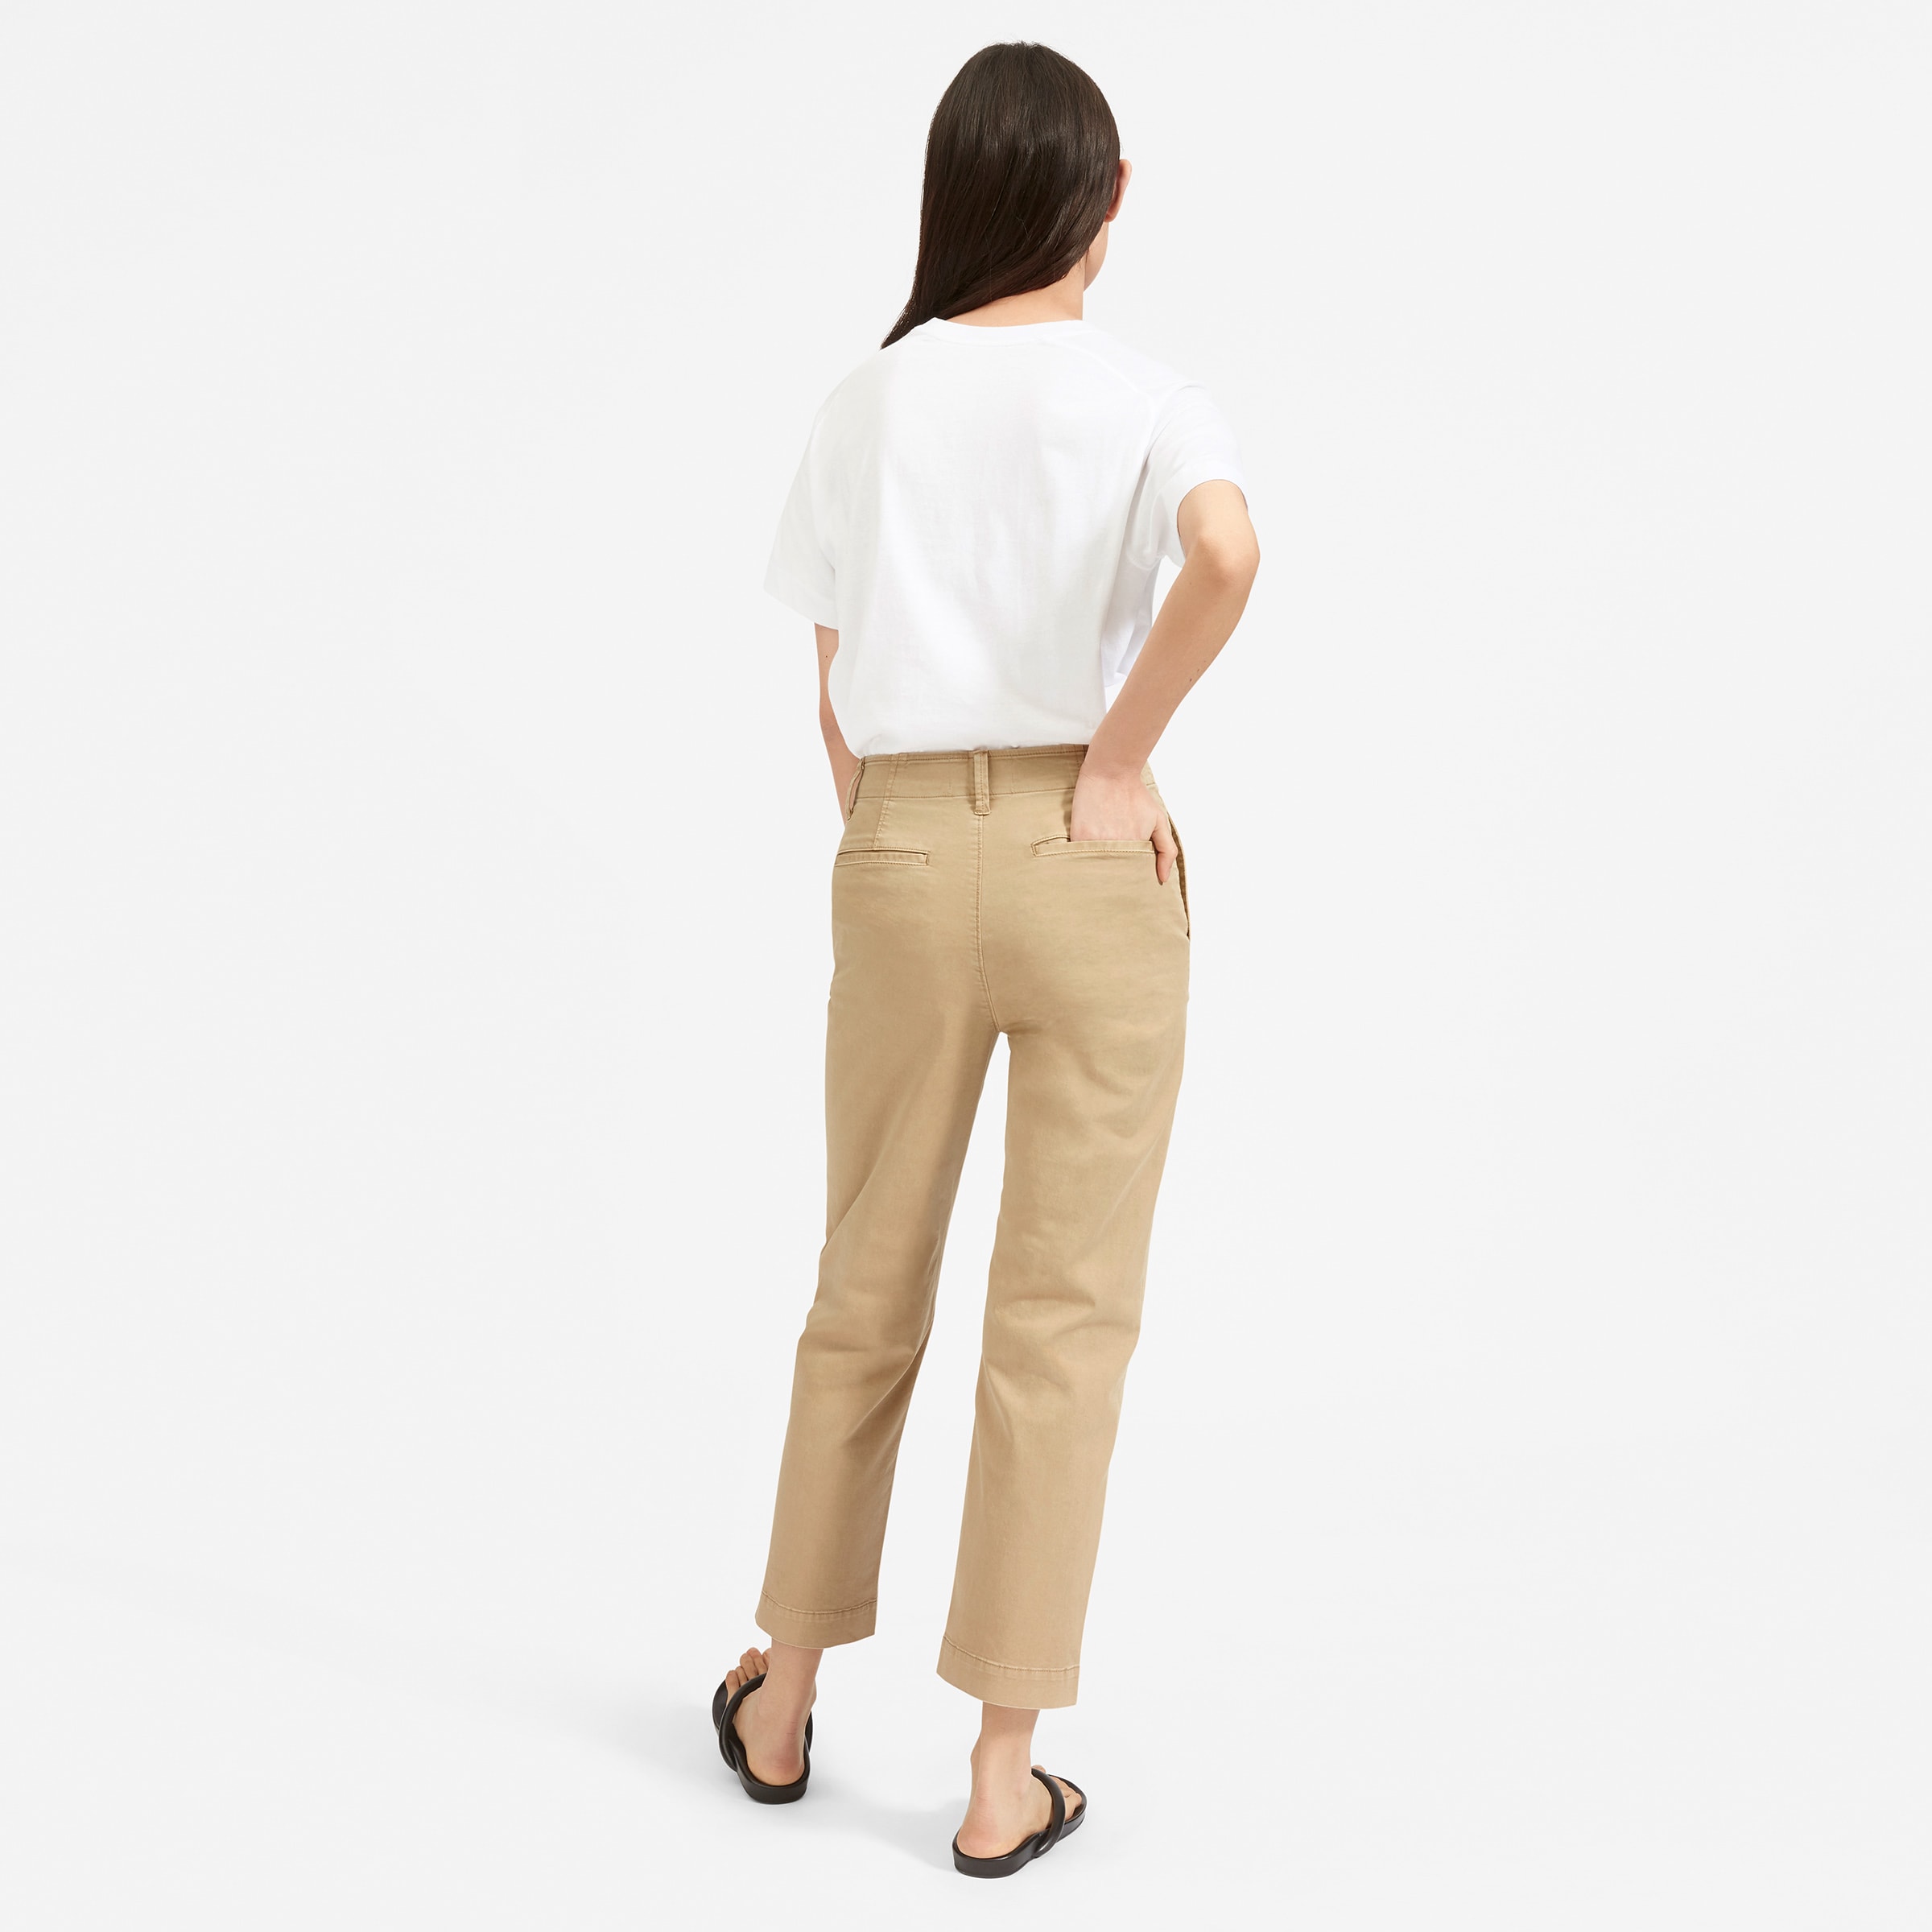 The Lightweight Relaxed Chino